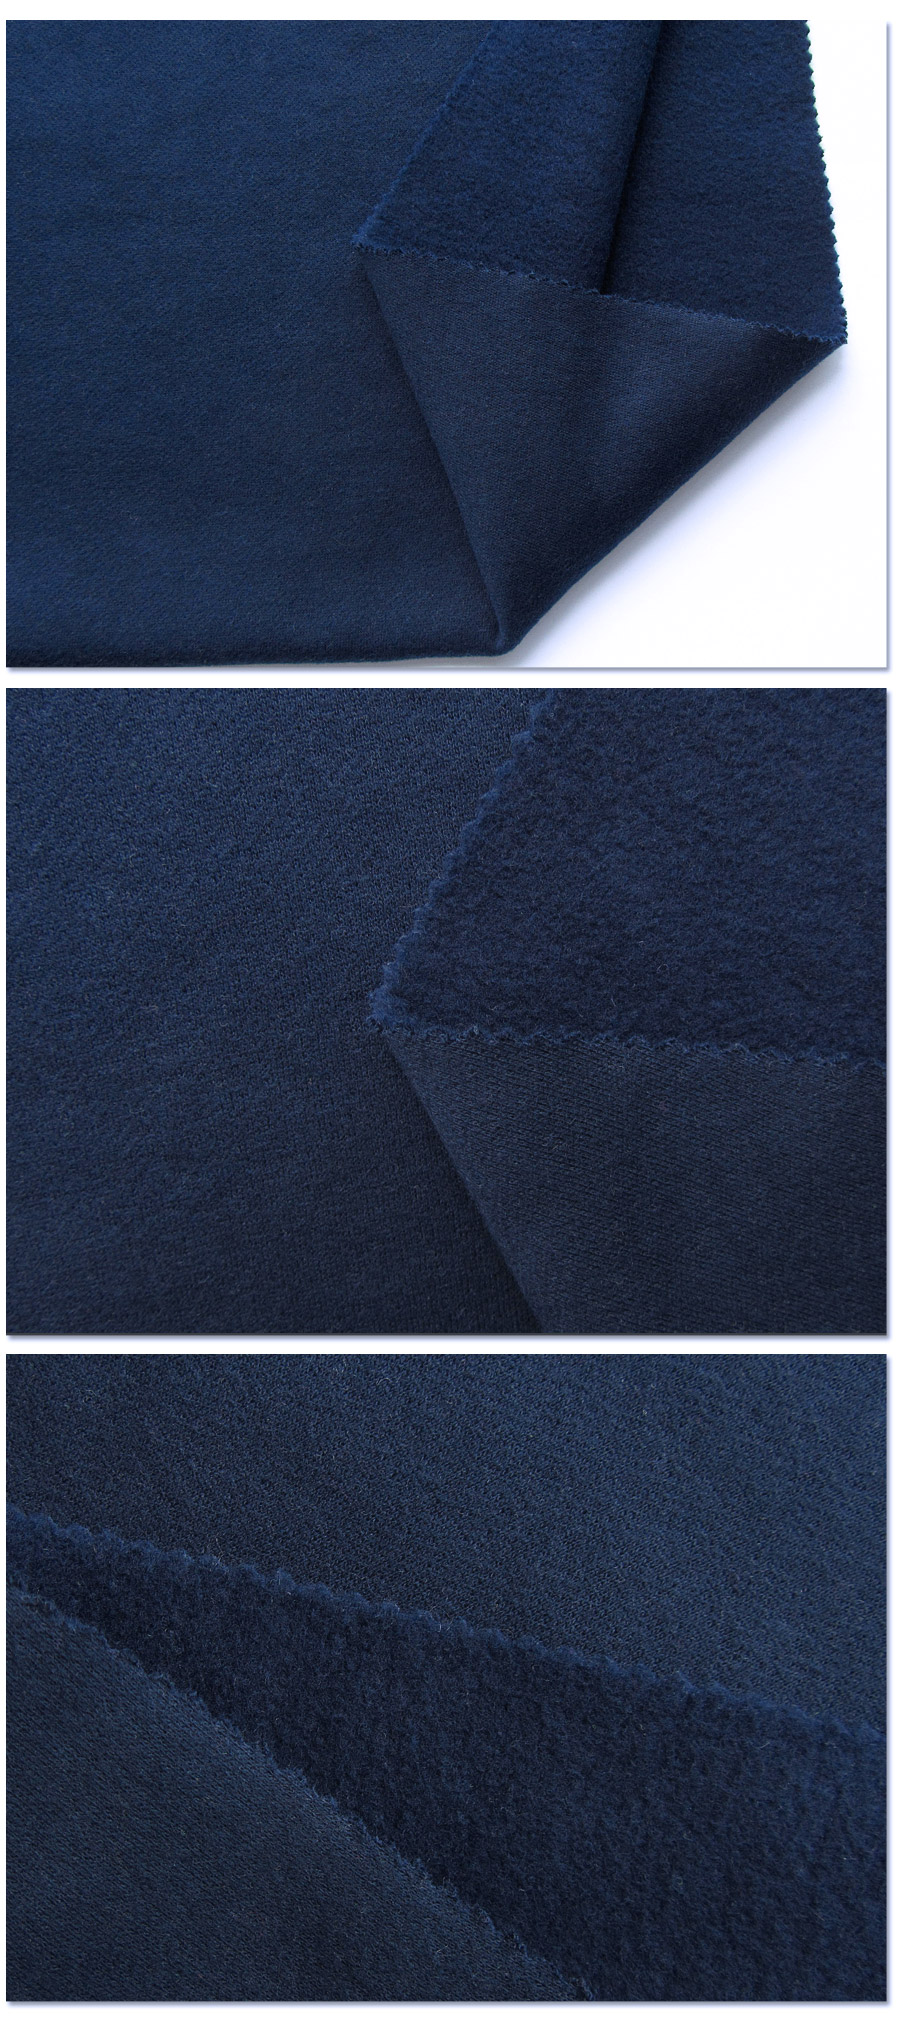 Sueded Brushed 100% Cotton Fleece Fabric